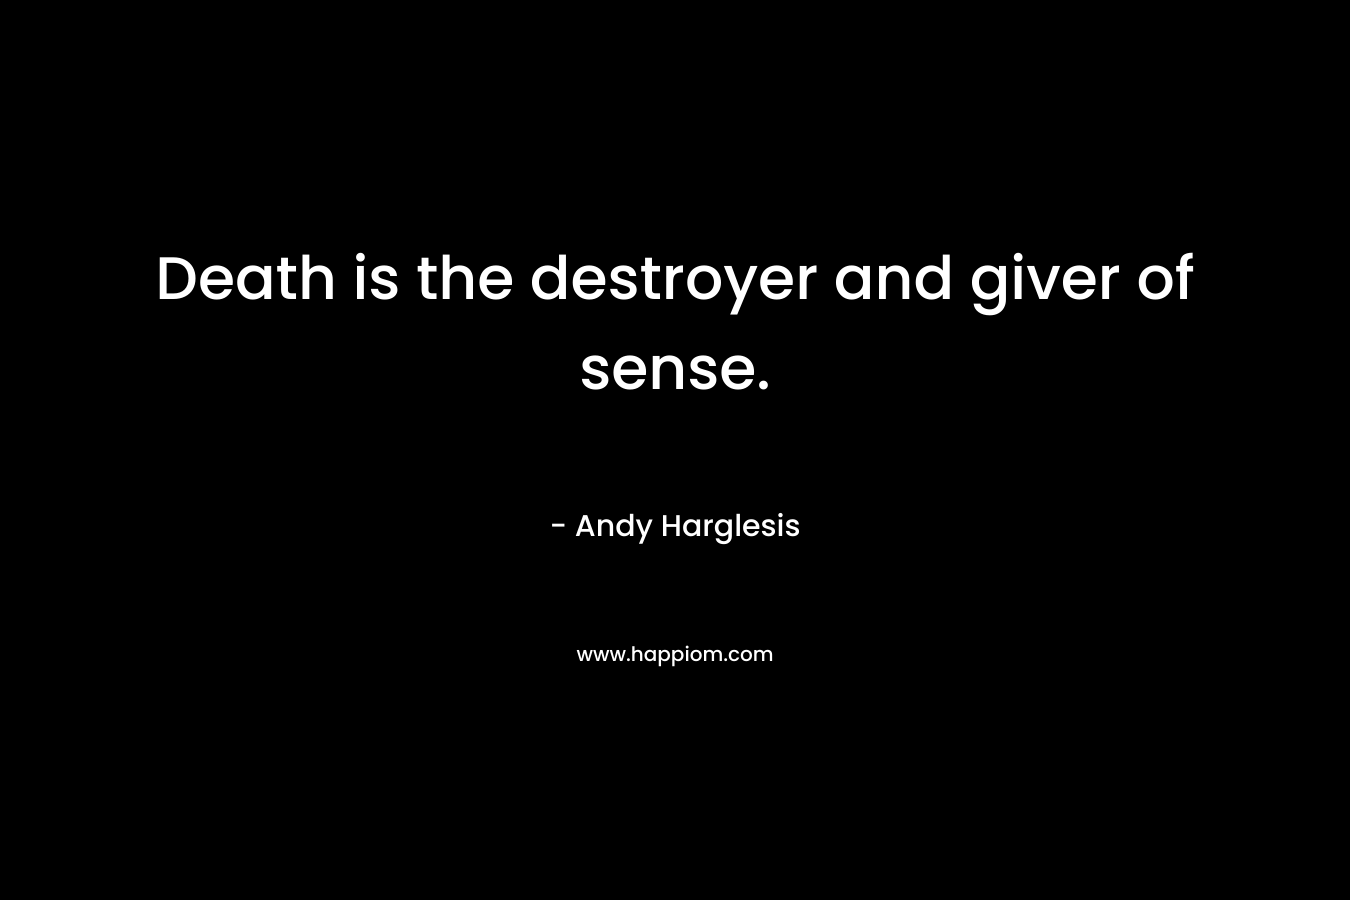 Death is the destroyer and giver of sense.